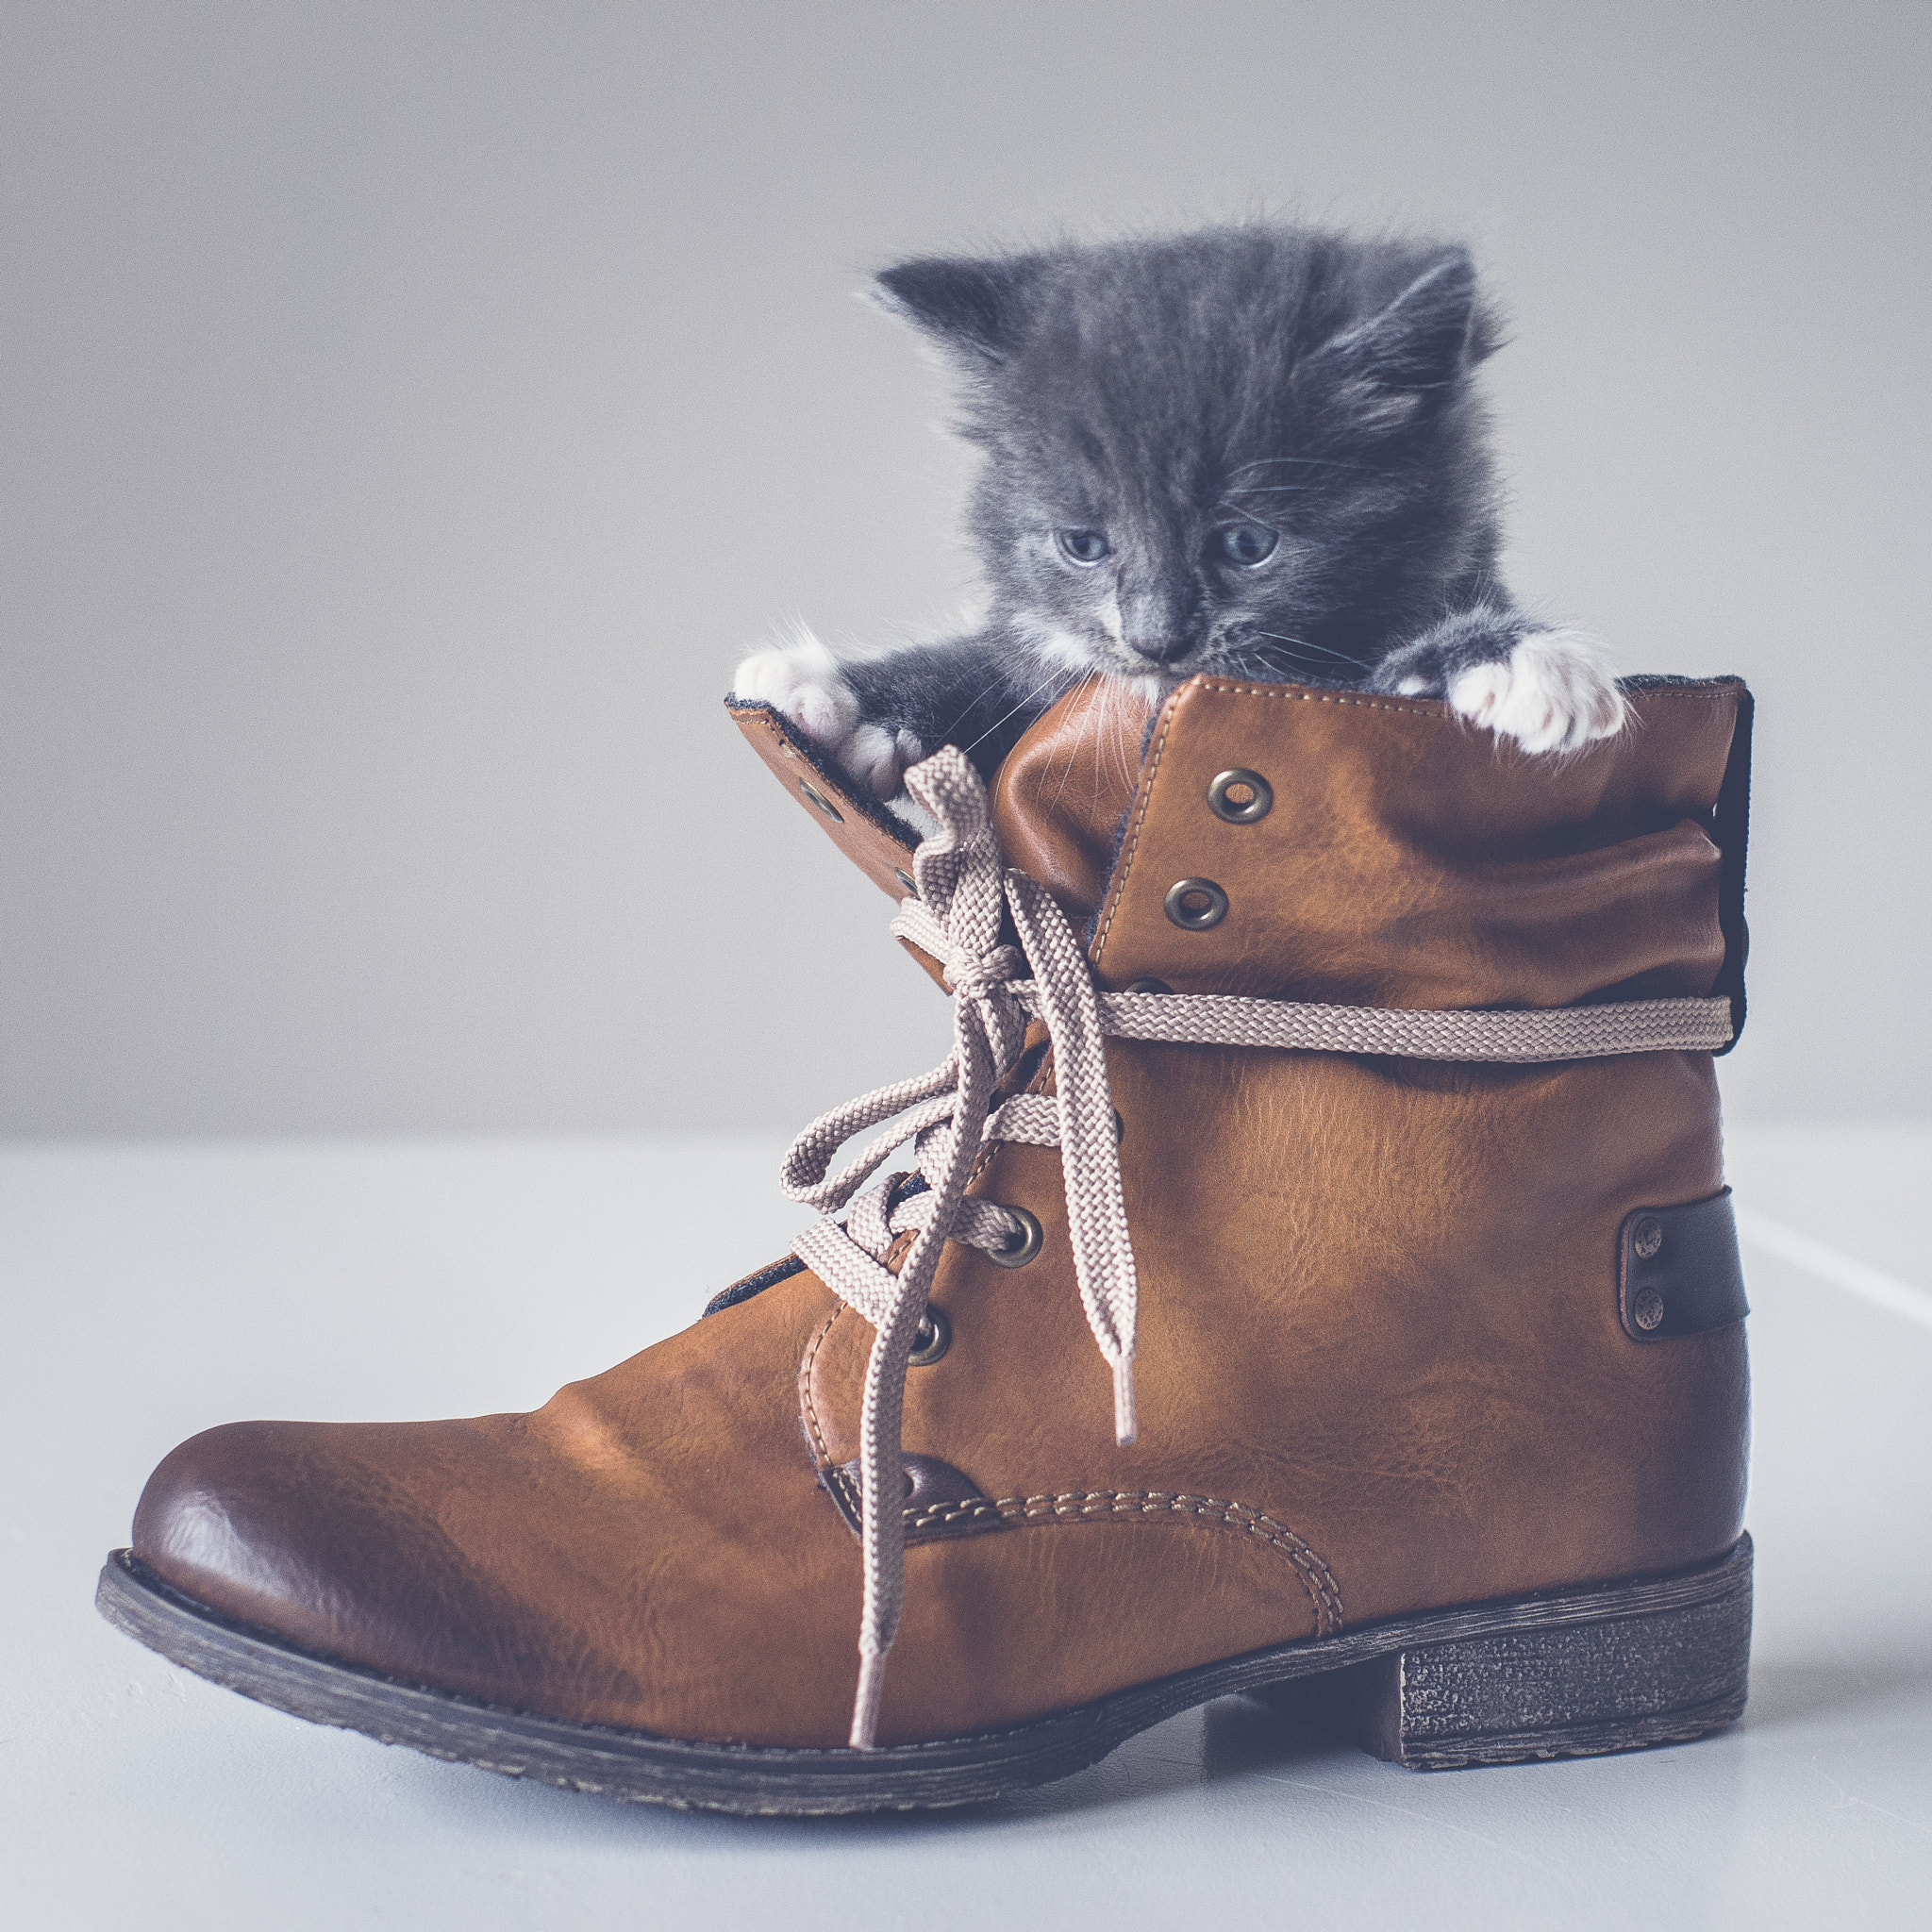 Pentax K-5 II sample photo. Puss in a boot photography